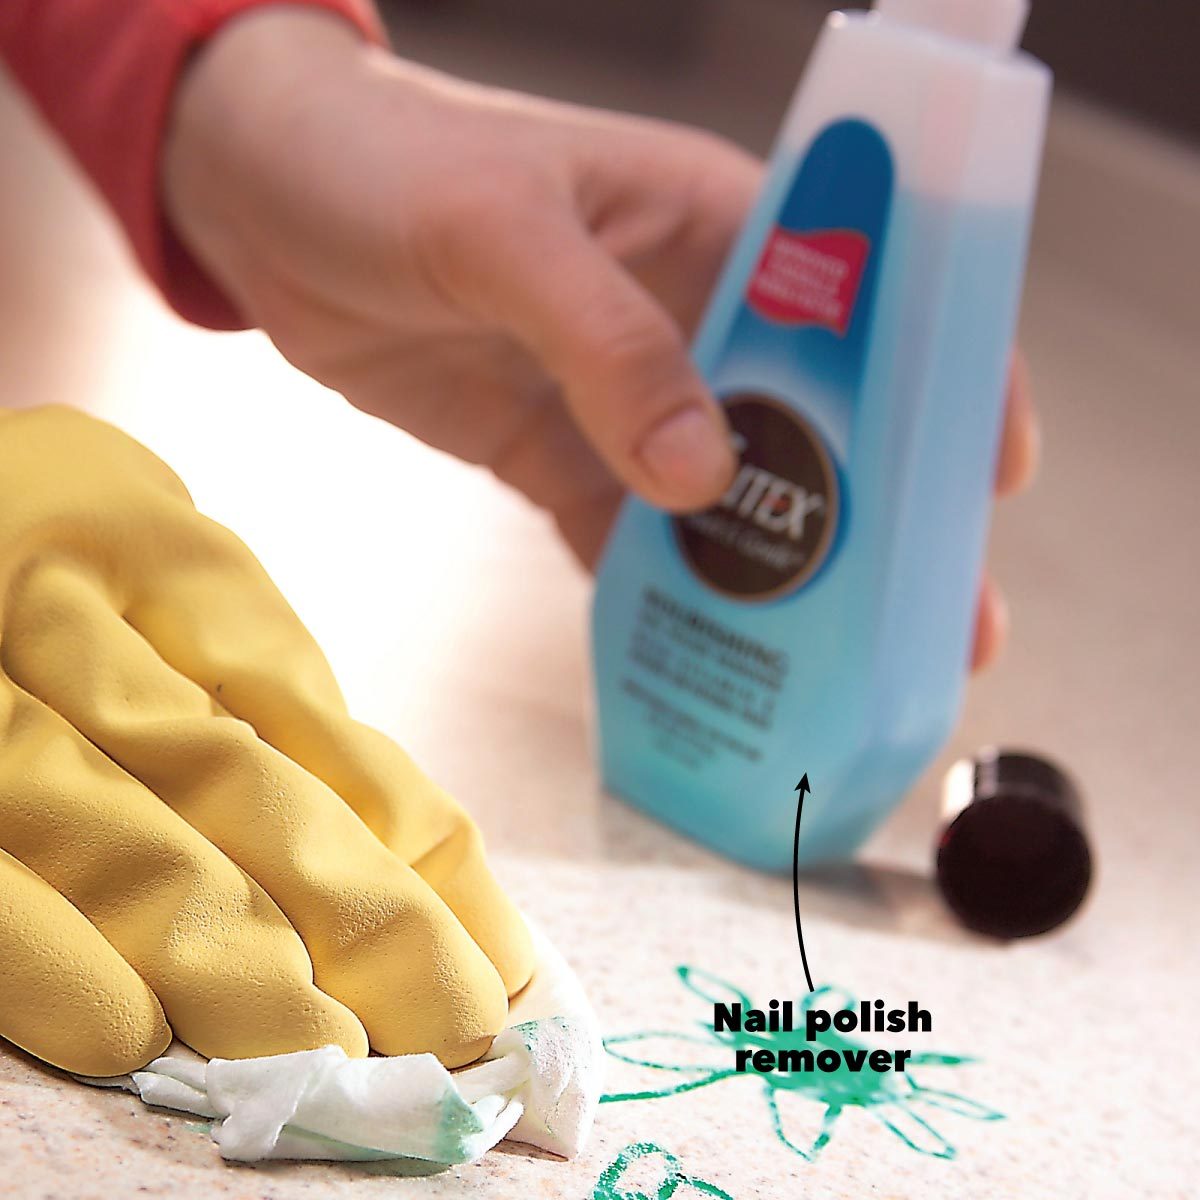 remove stains from countertops nail polish remover